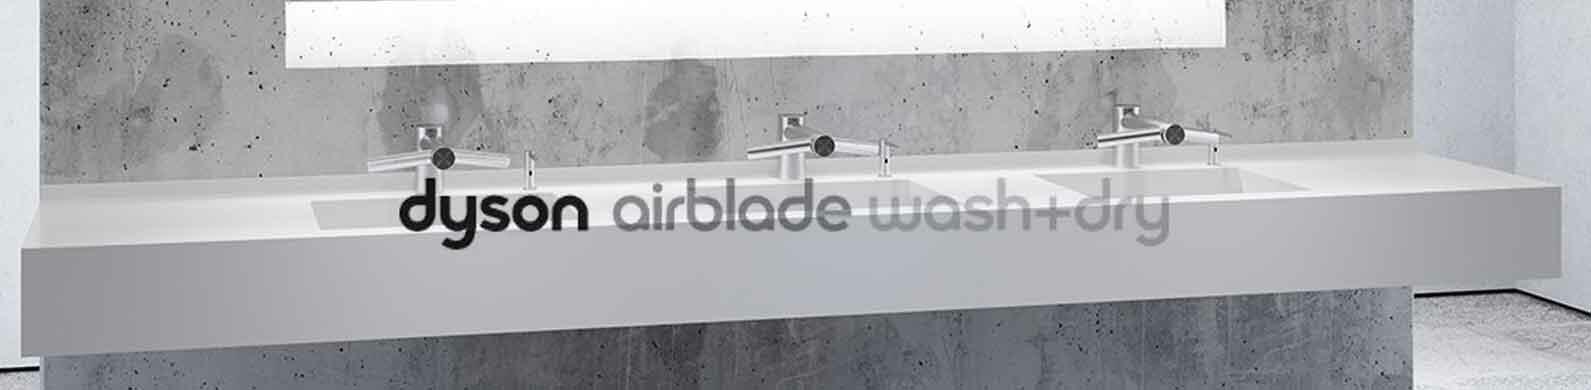 Dyson Airblade Wash+Dry Tap